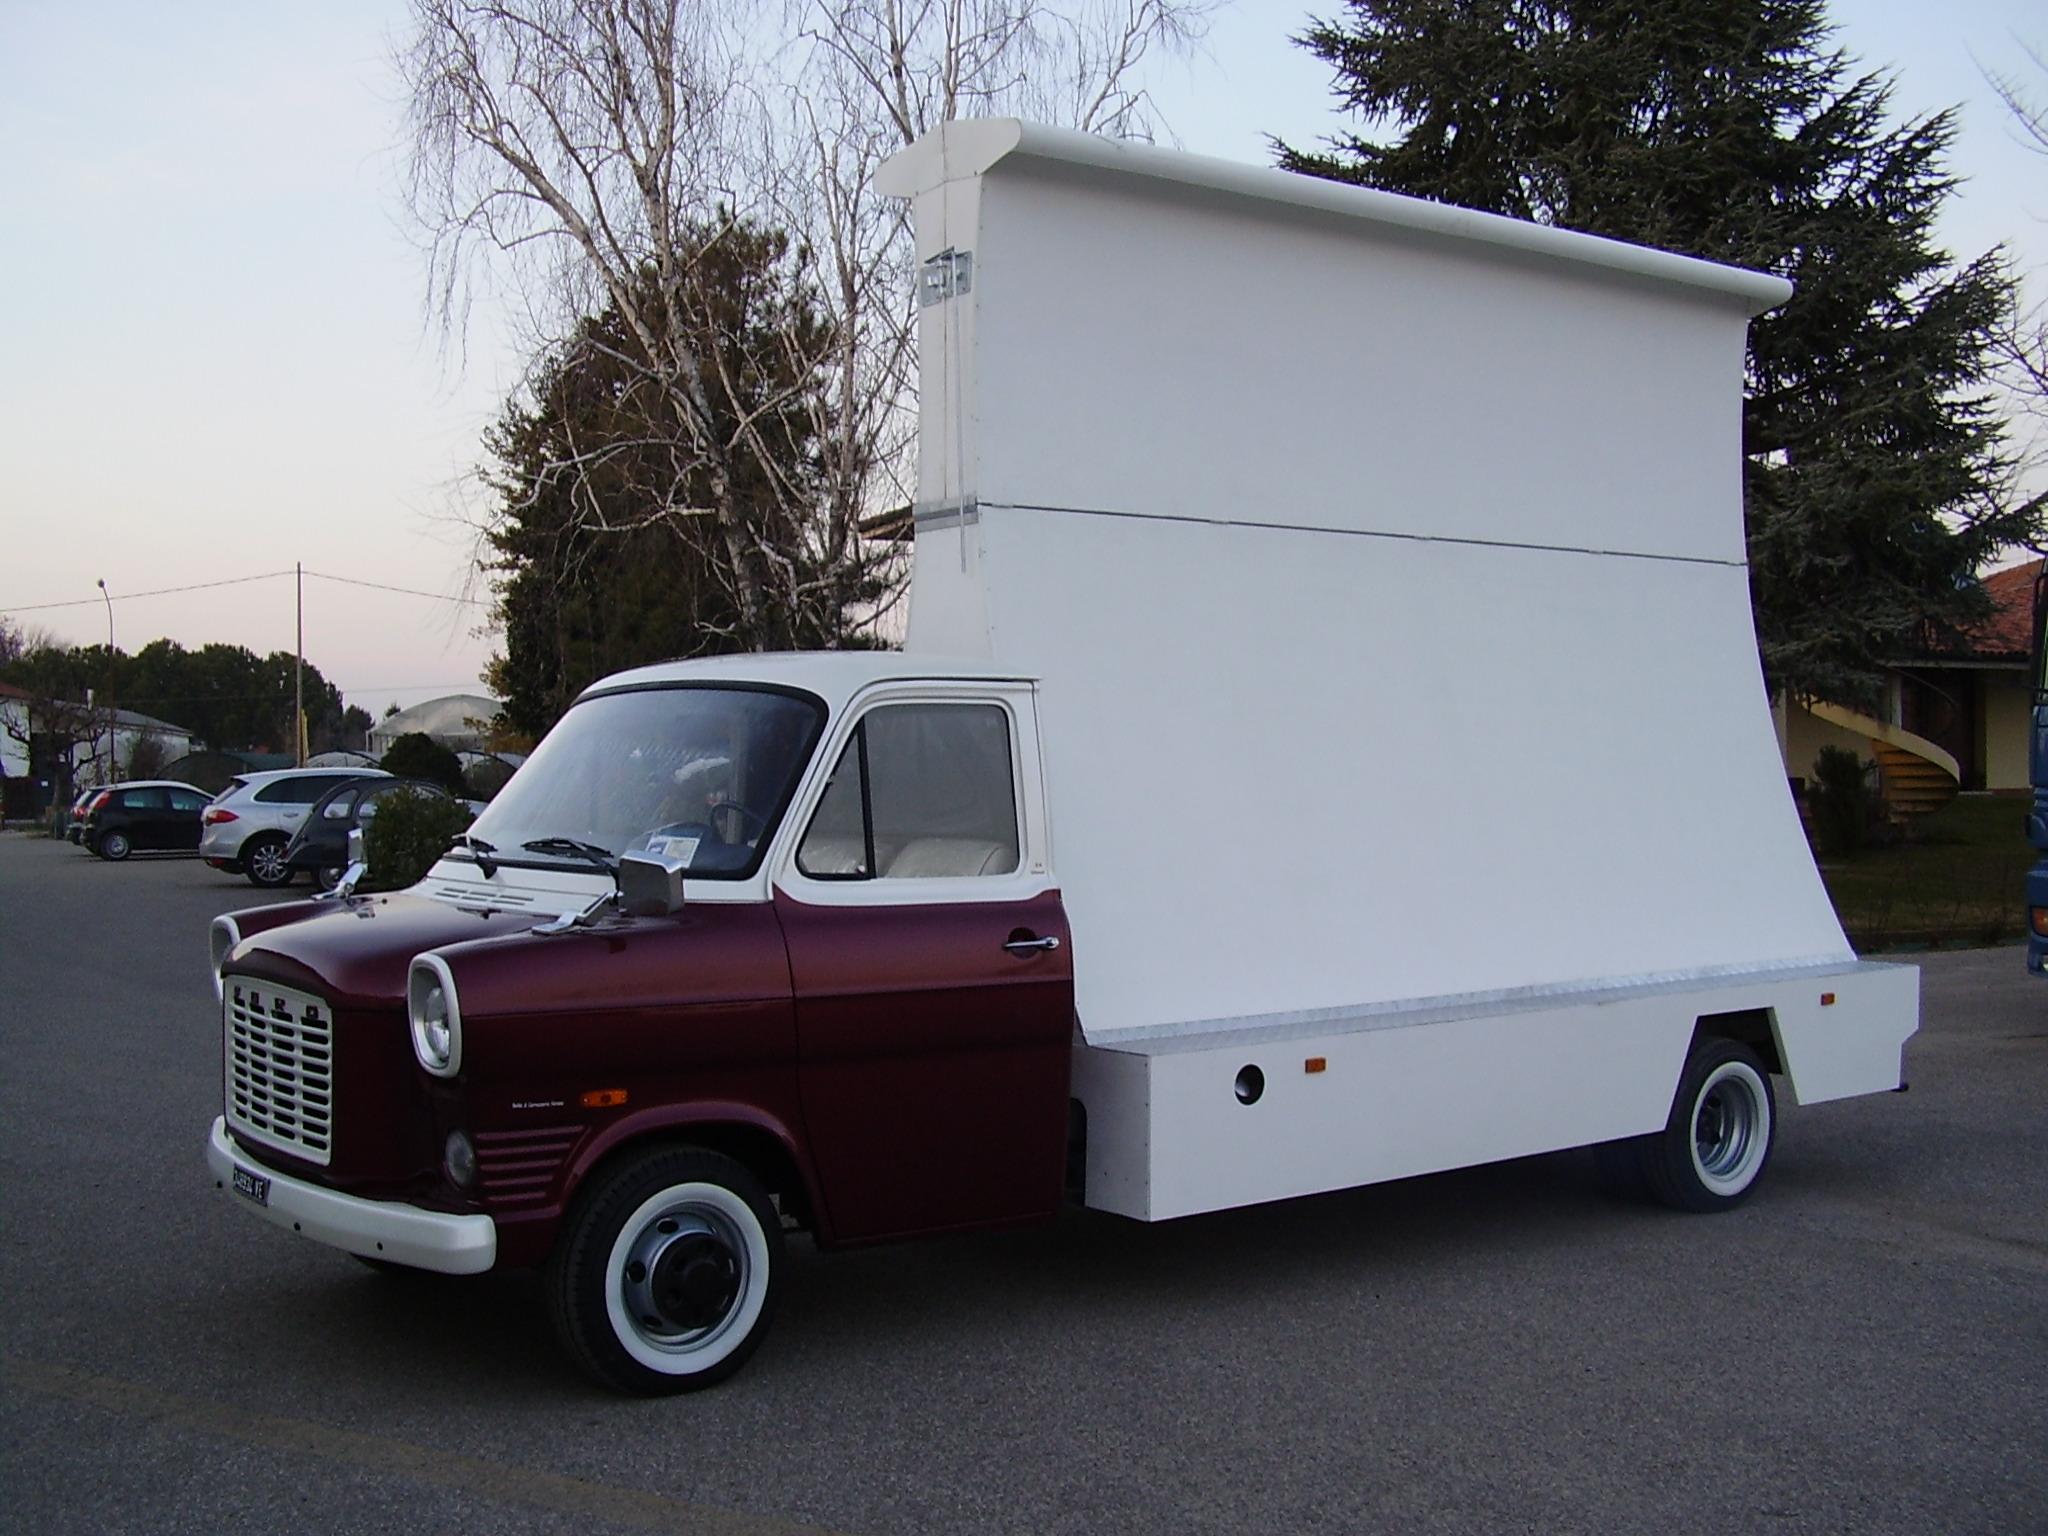 Fixed advertising sail with jointed sail system on vintage Ford truck